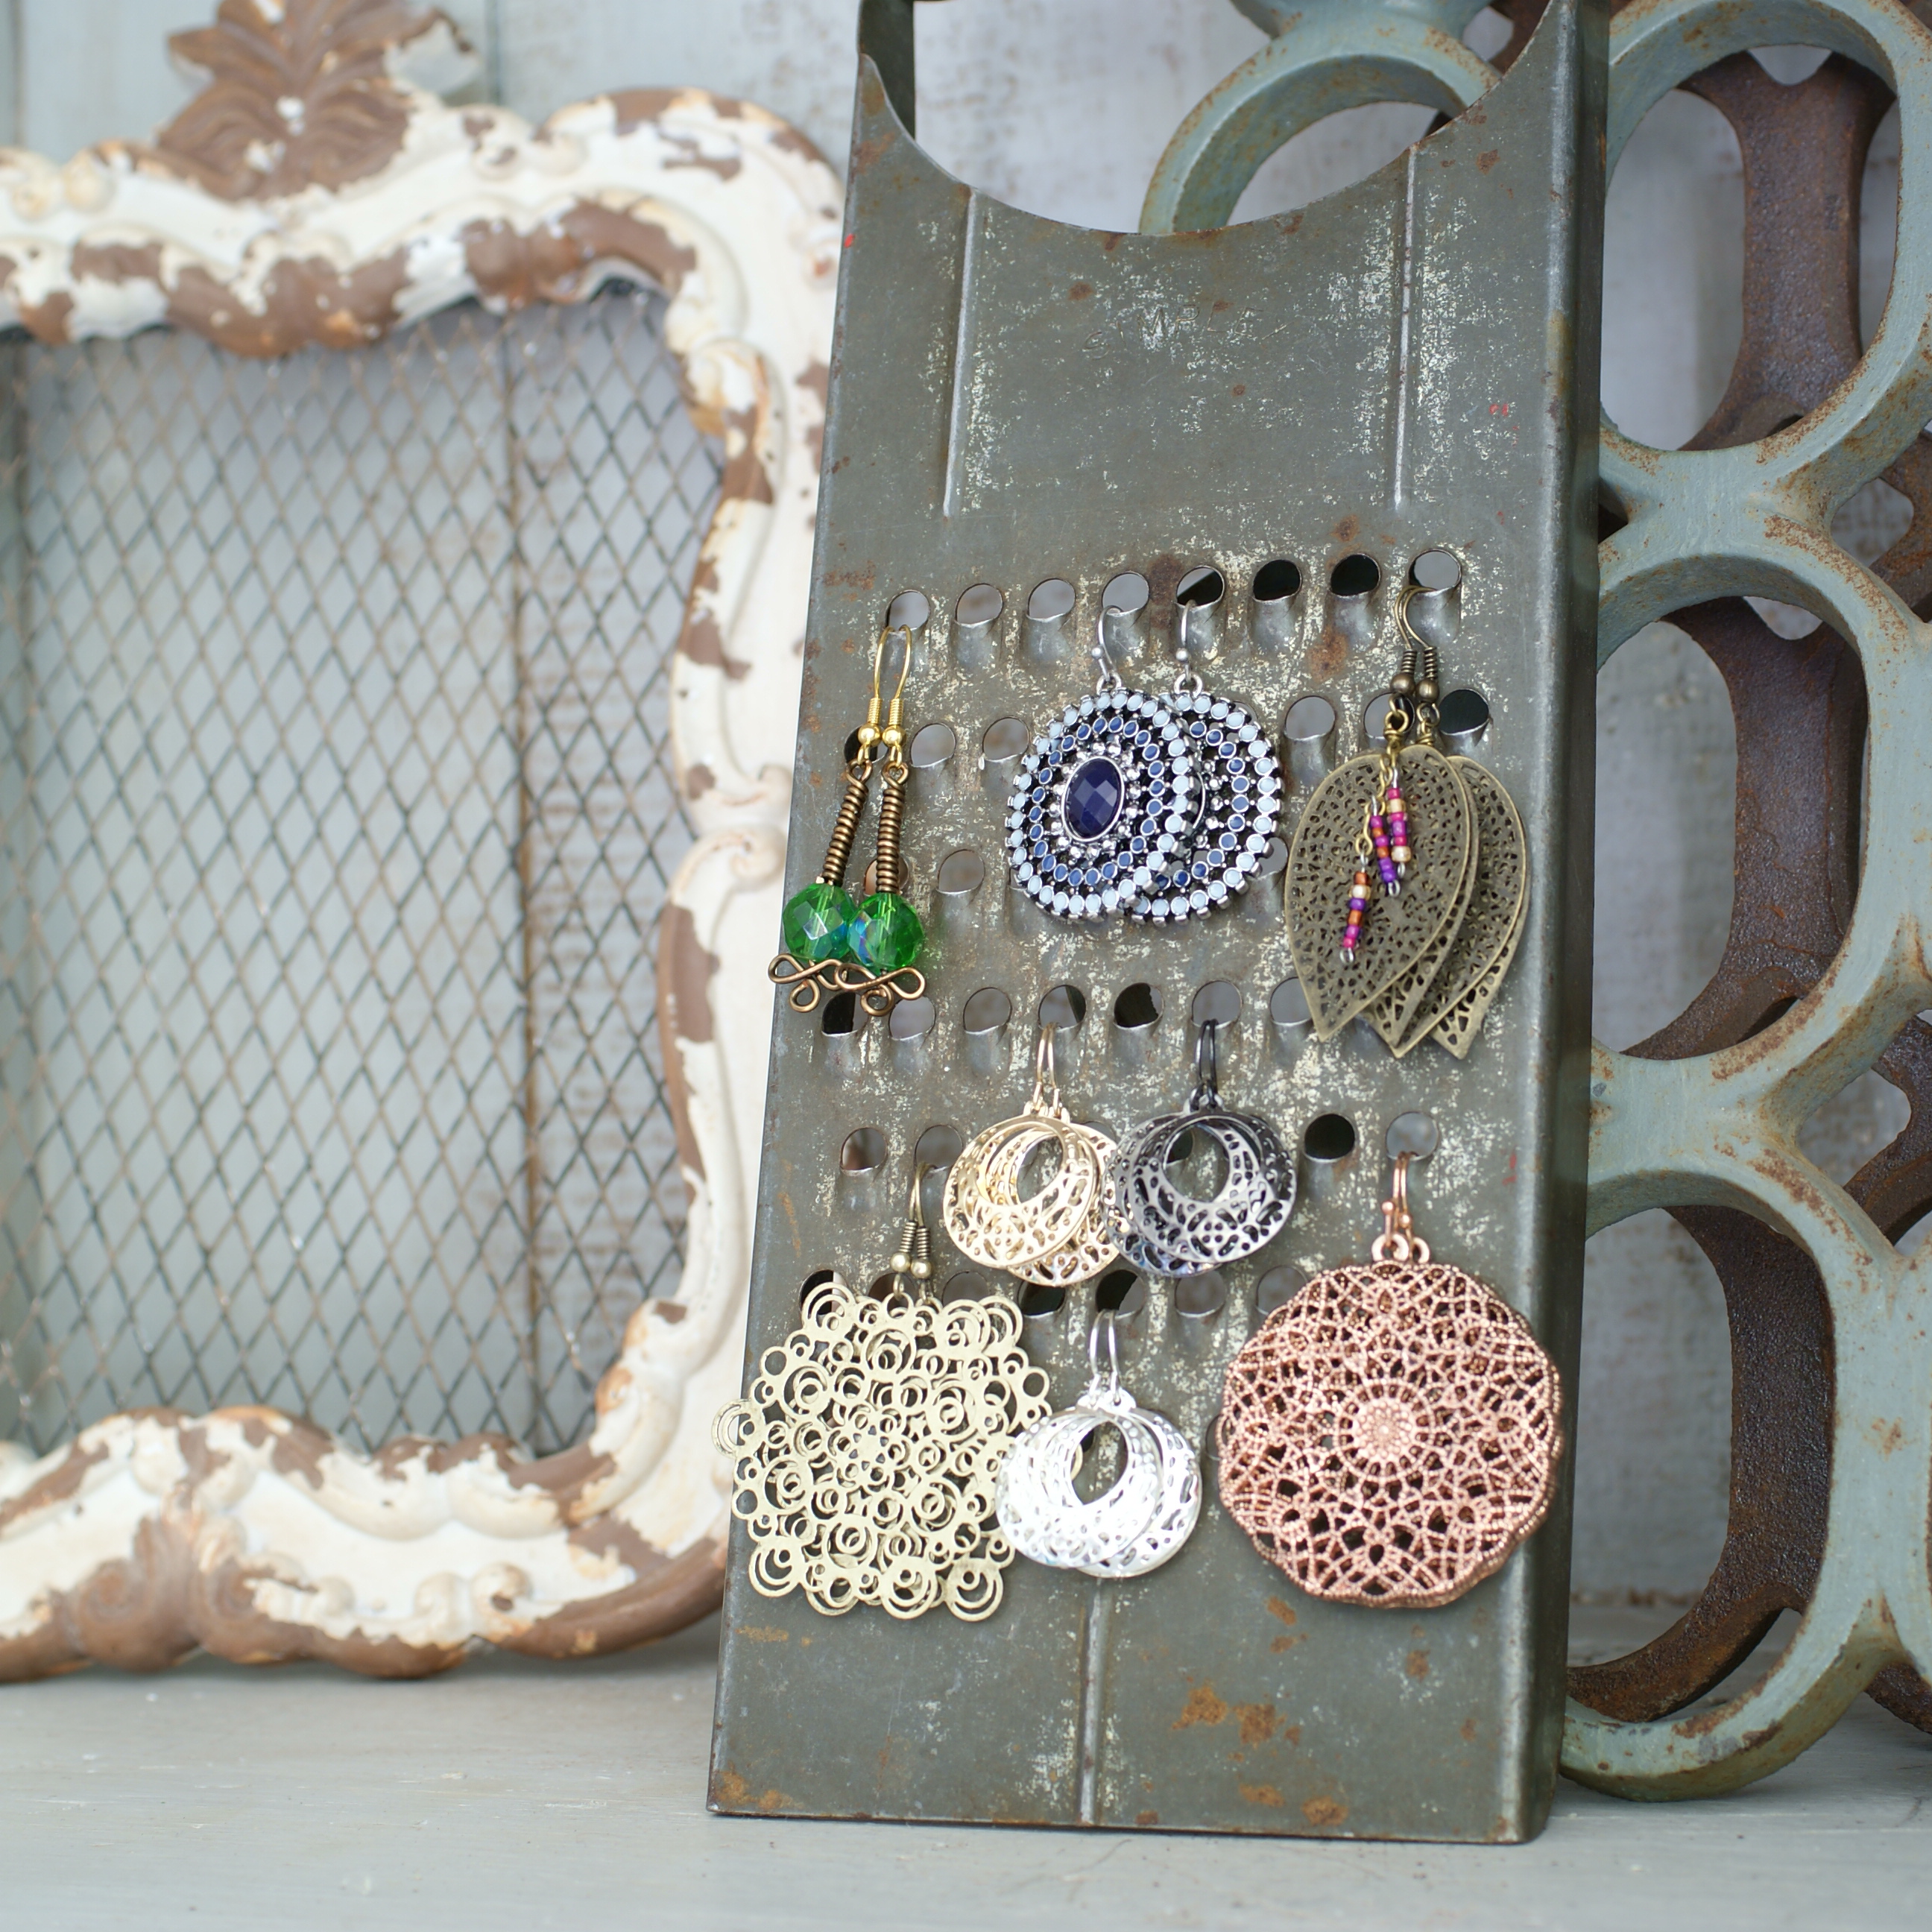 DIY Jewelry Display from Vintage Grater